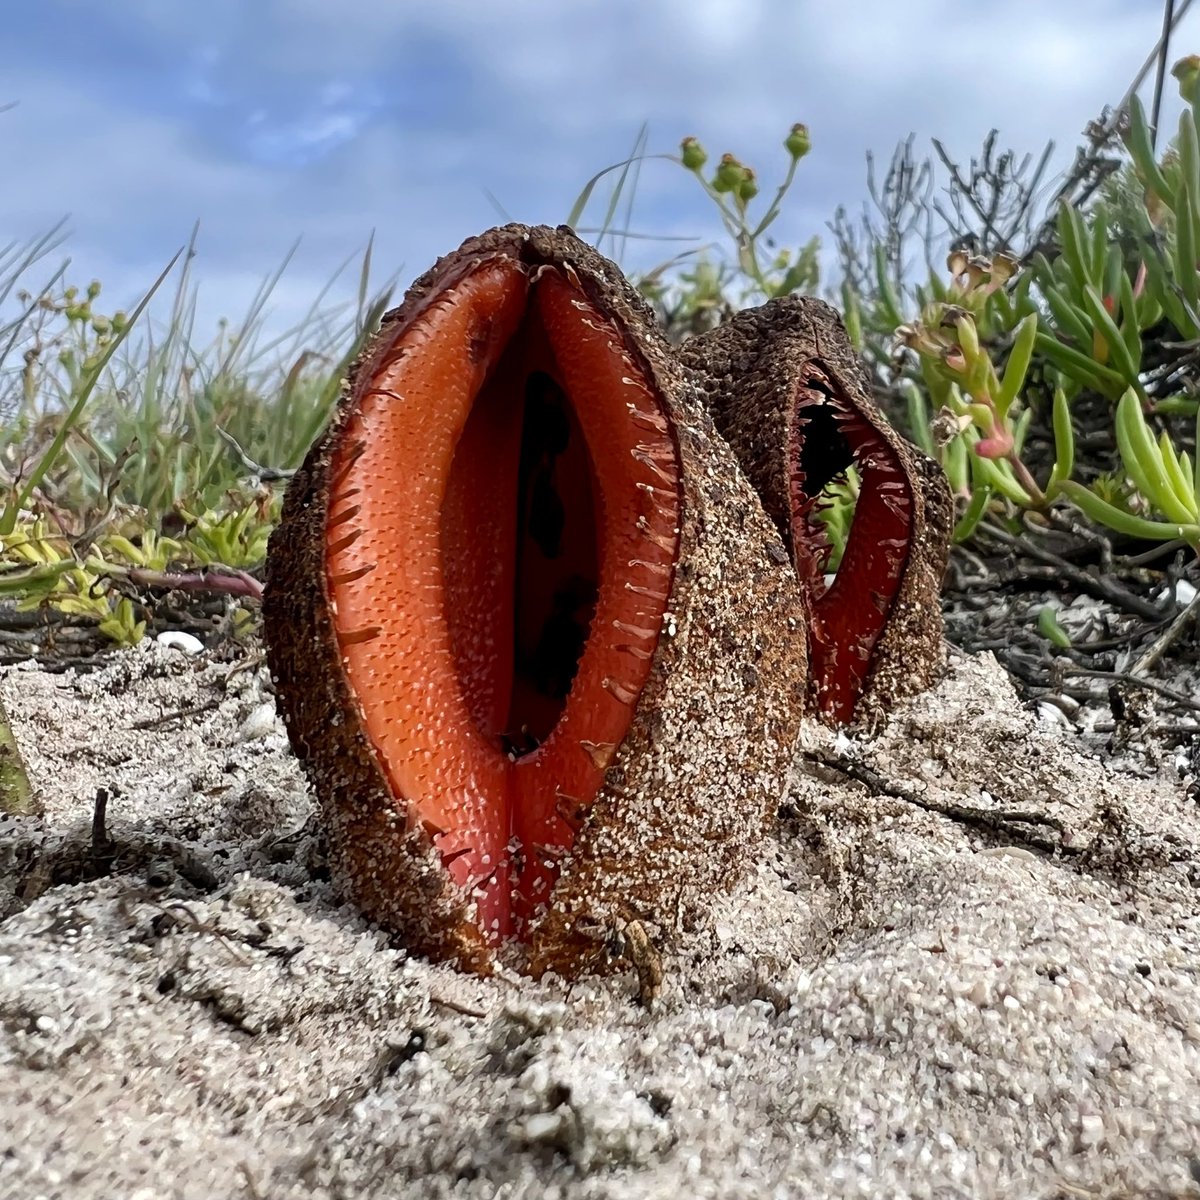 Jakkalskos

Hydnora africana is a holoparasitic plant (not fungus). It produces no chlorophyll & is entirely dependent on a host plant. In place of roots it feeds off of its host via a special structure called a haustorium. This species parasitises on Euphorbias.